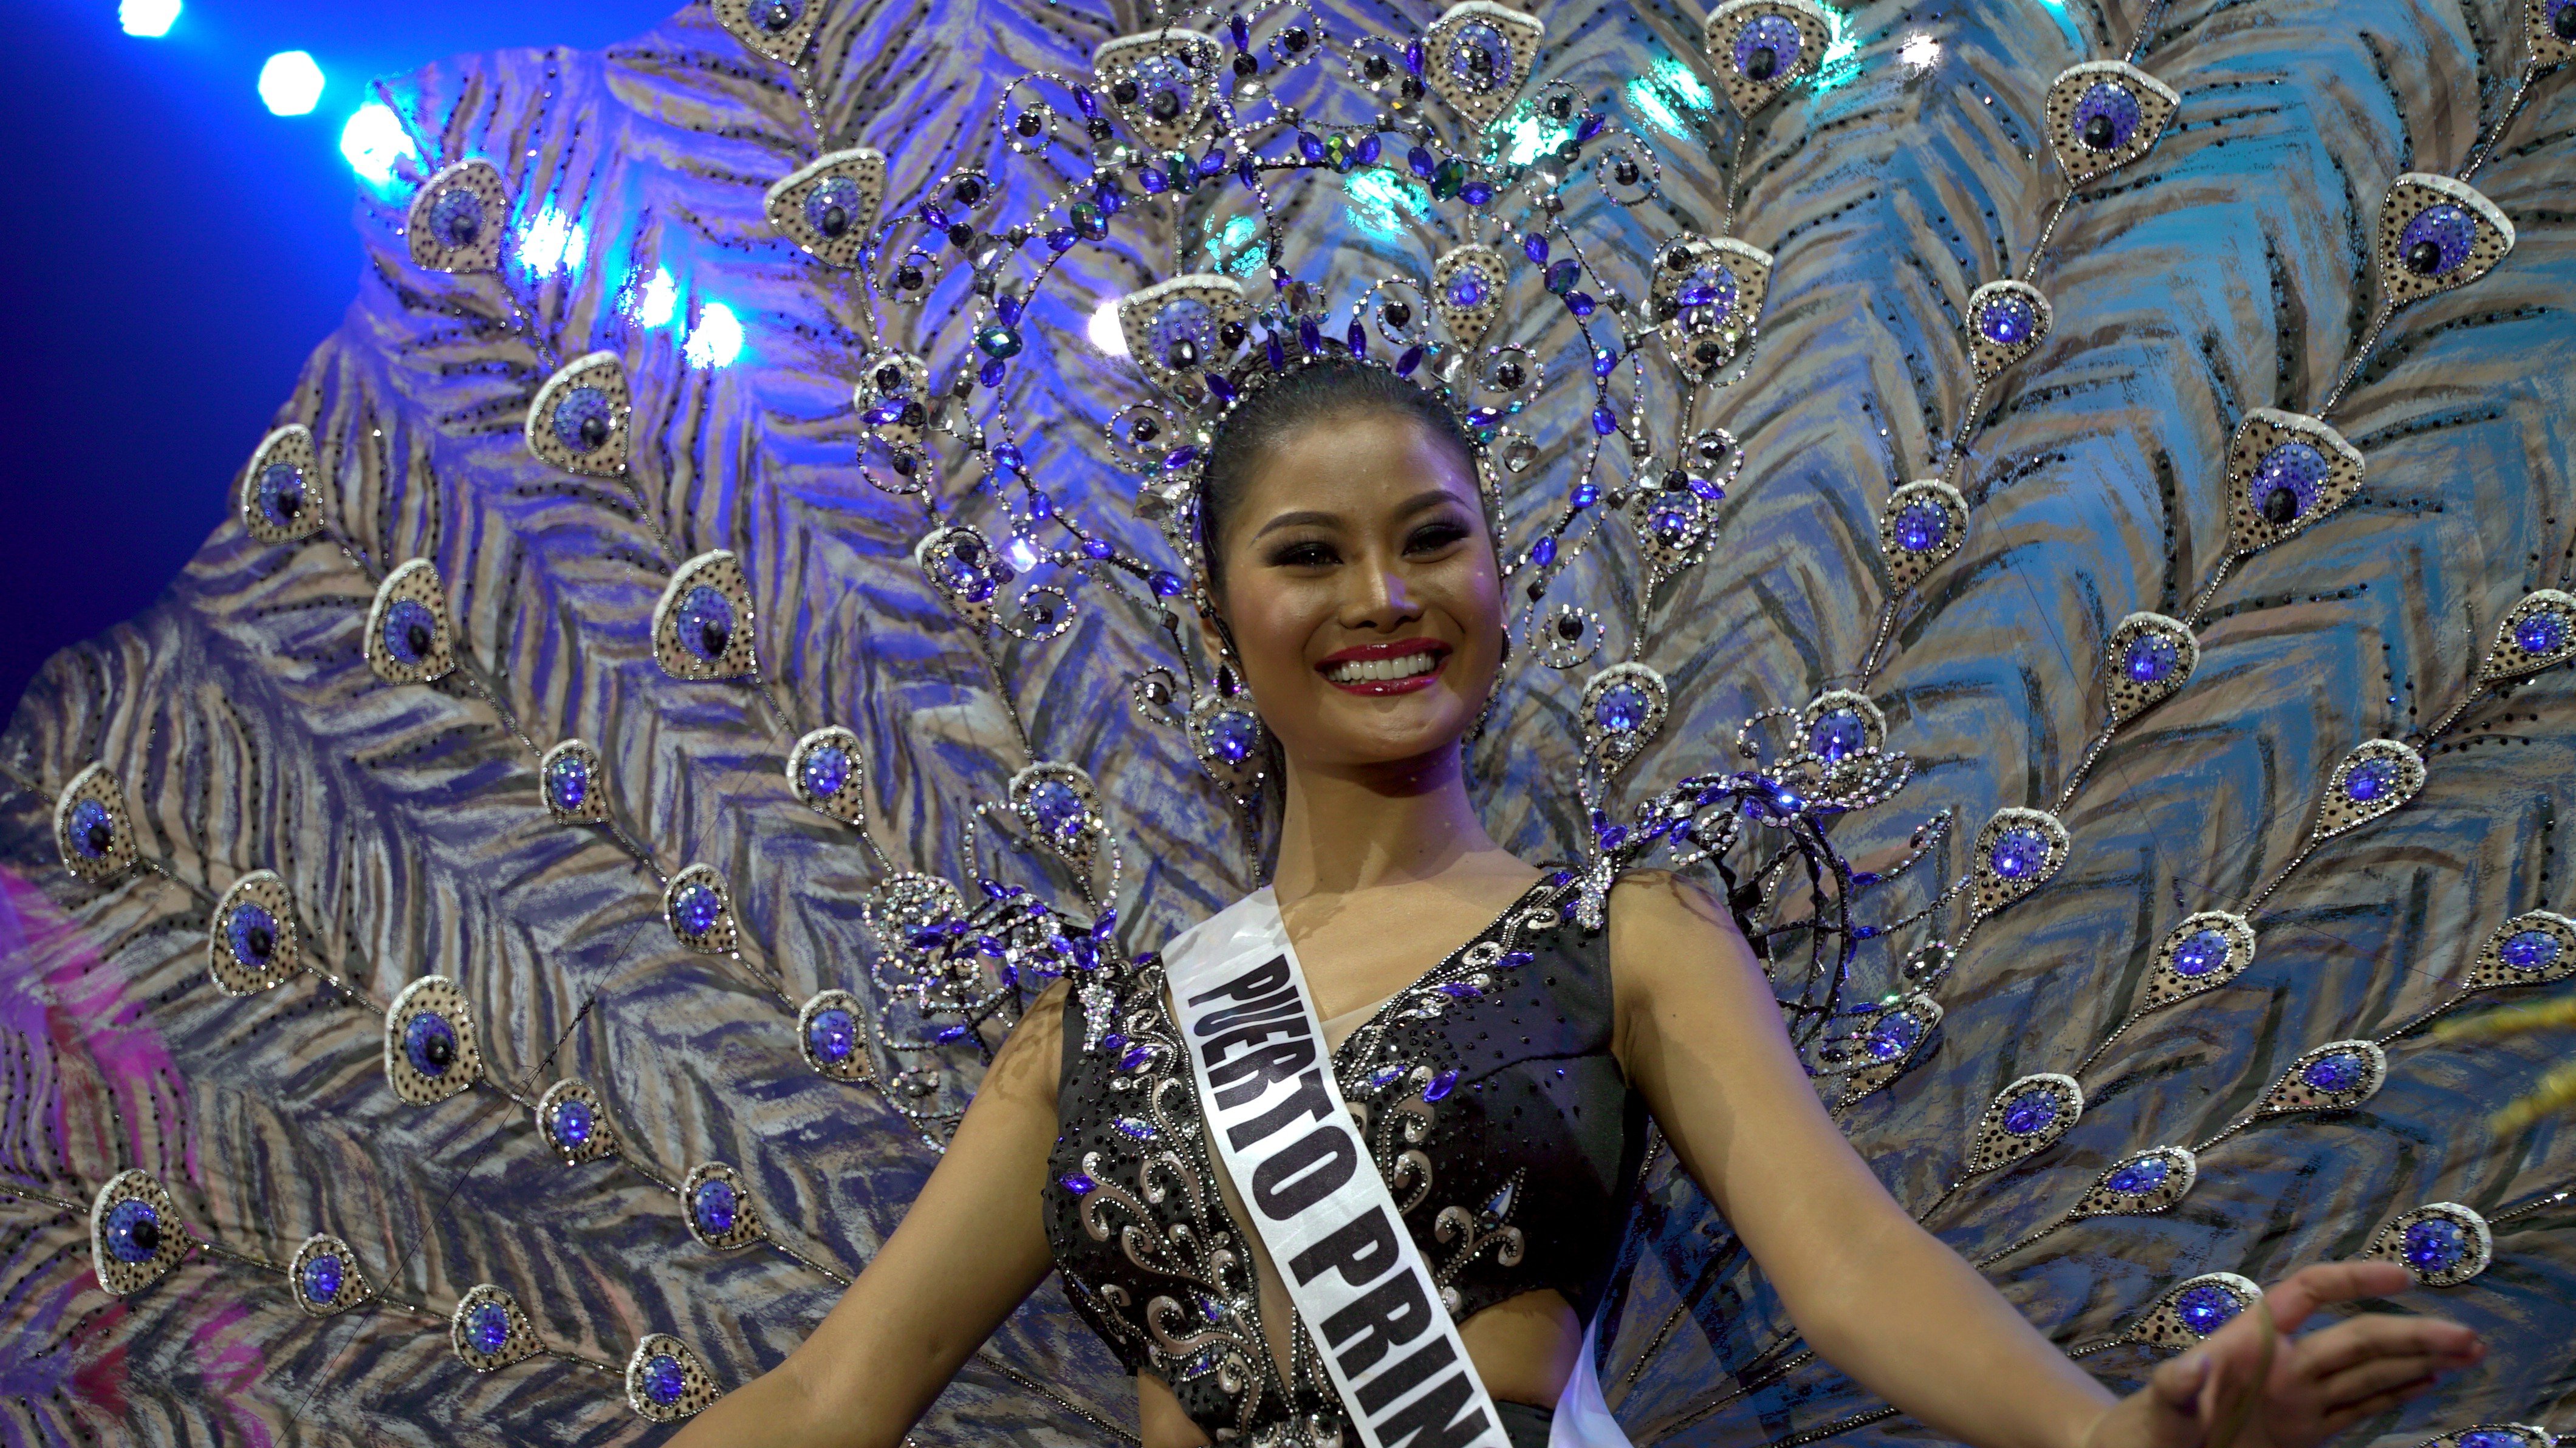 Jessarie Dumaguing has set her sights on one of the Binibining Pilipinas crowns. Photo: SCMP